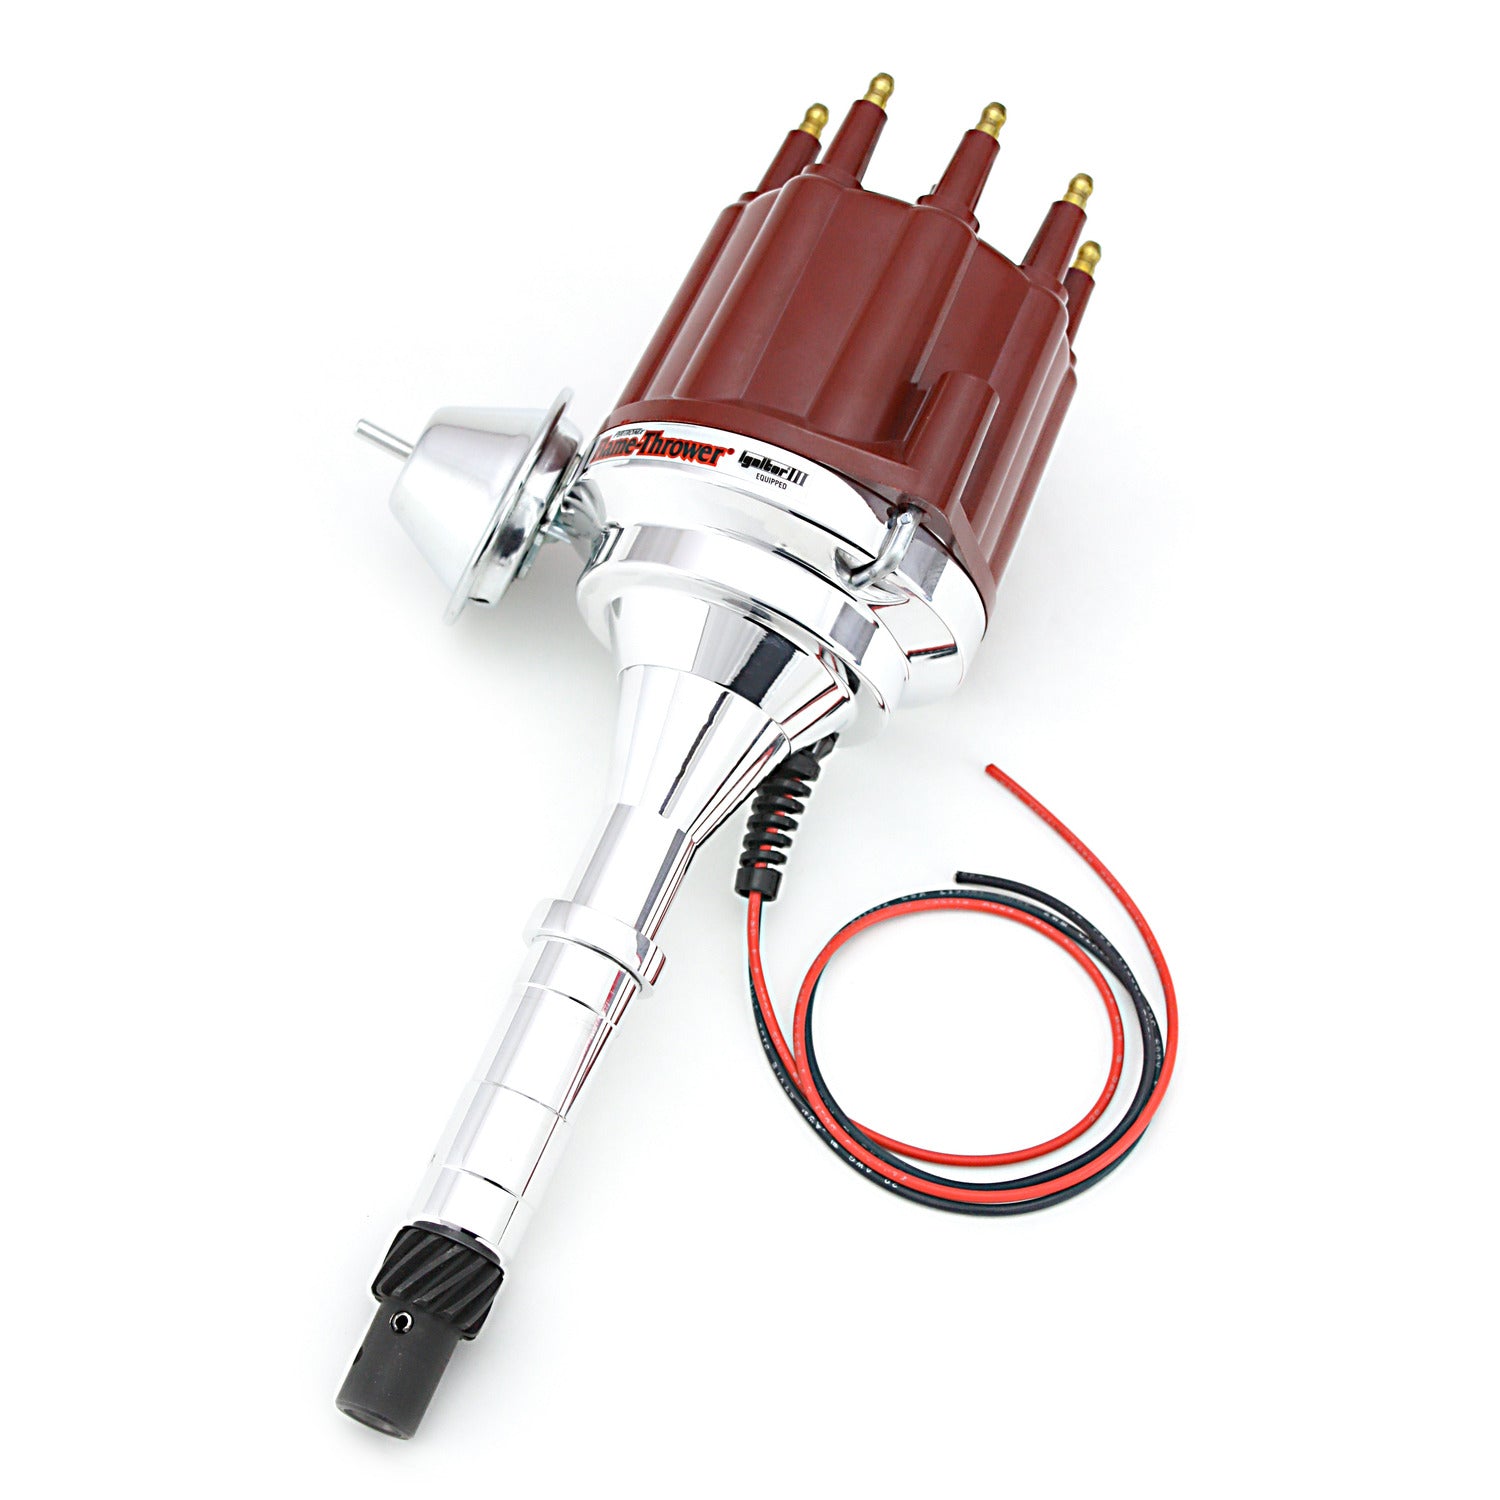 PerTronix D7160711 Flame-Thrower Electronic Distributor Billet AMC V8 with Ignitor III Vacuum Advance Red Male Cap